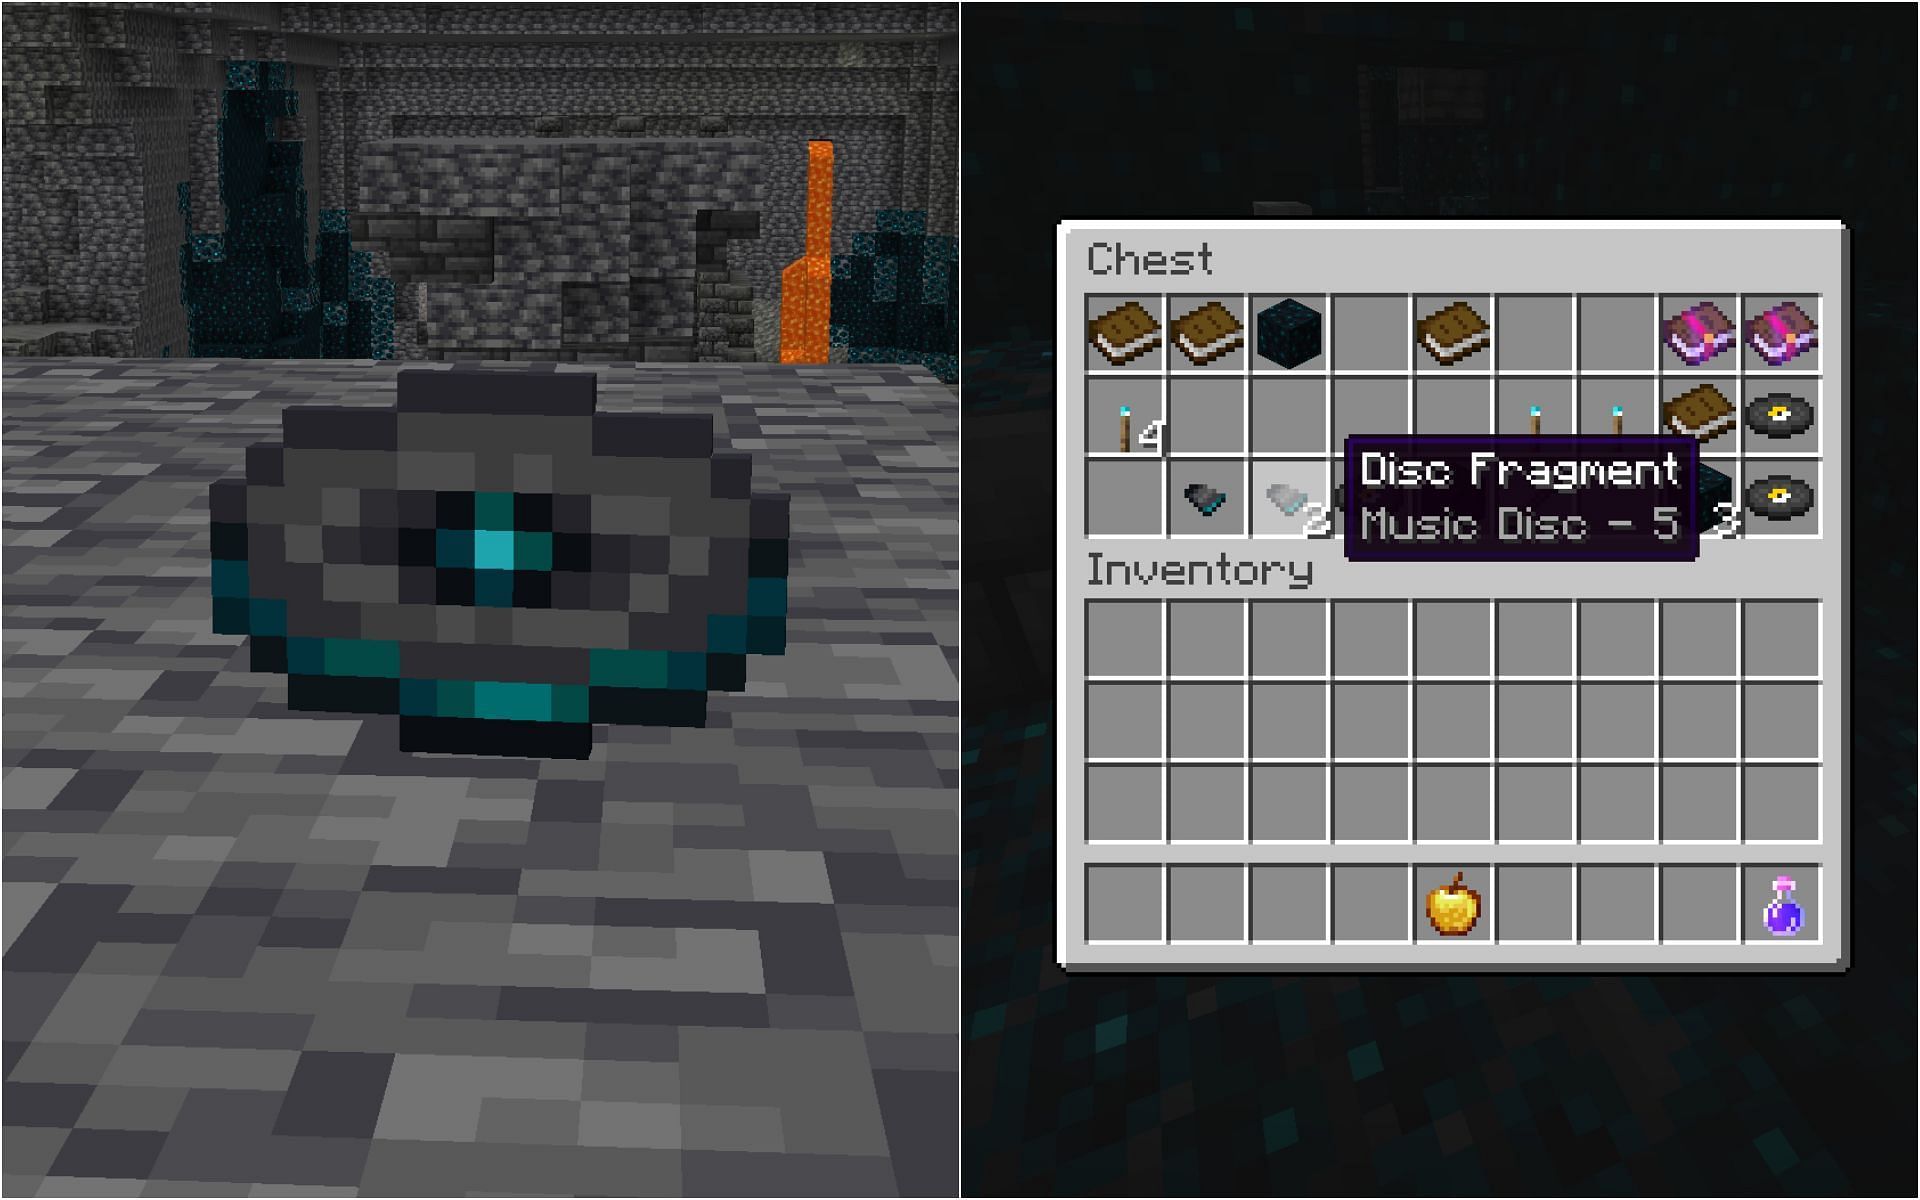 Disc 5 and disc fragments (Image via Minecraft)